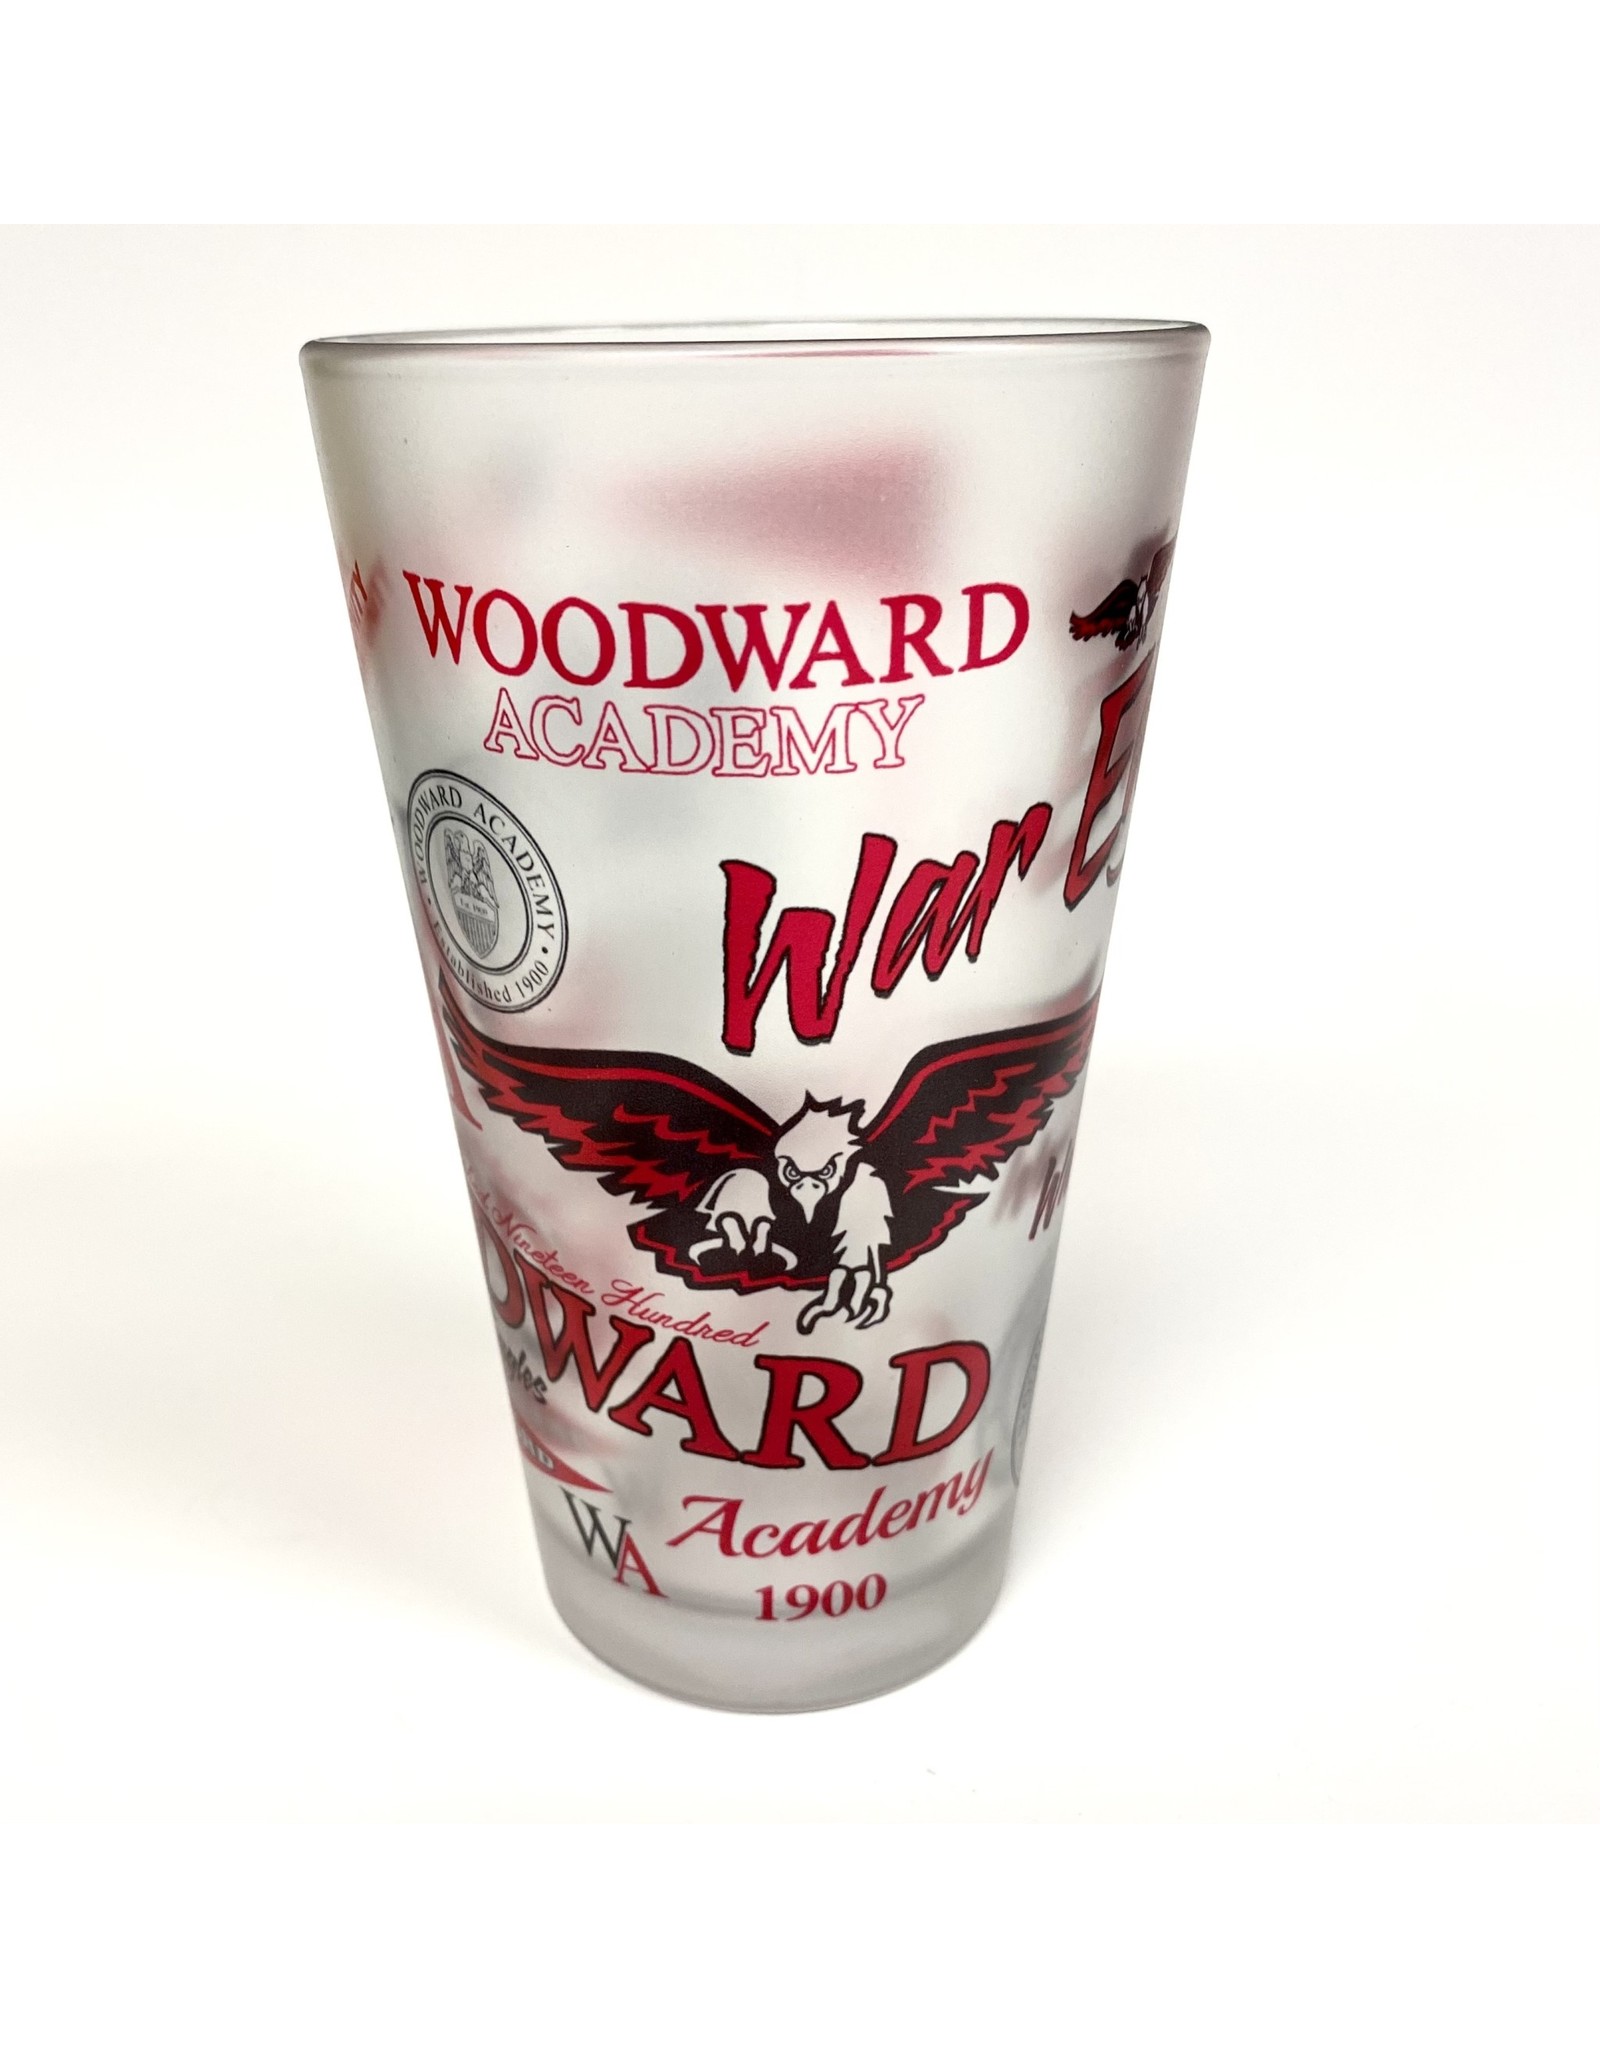 Jardine Cup Frosted Wrapped Glass 16oz